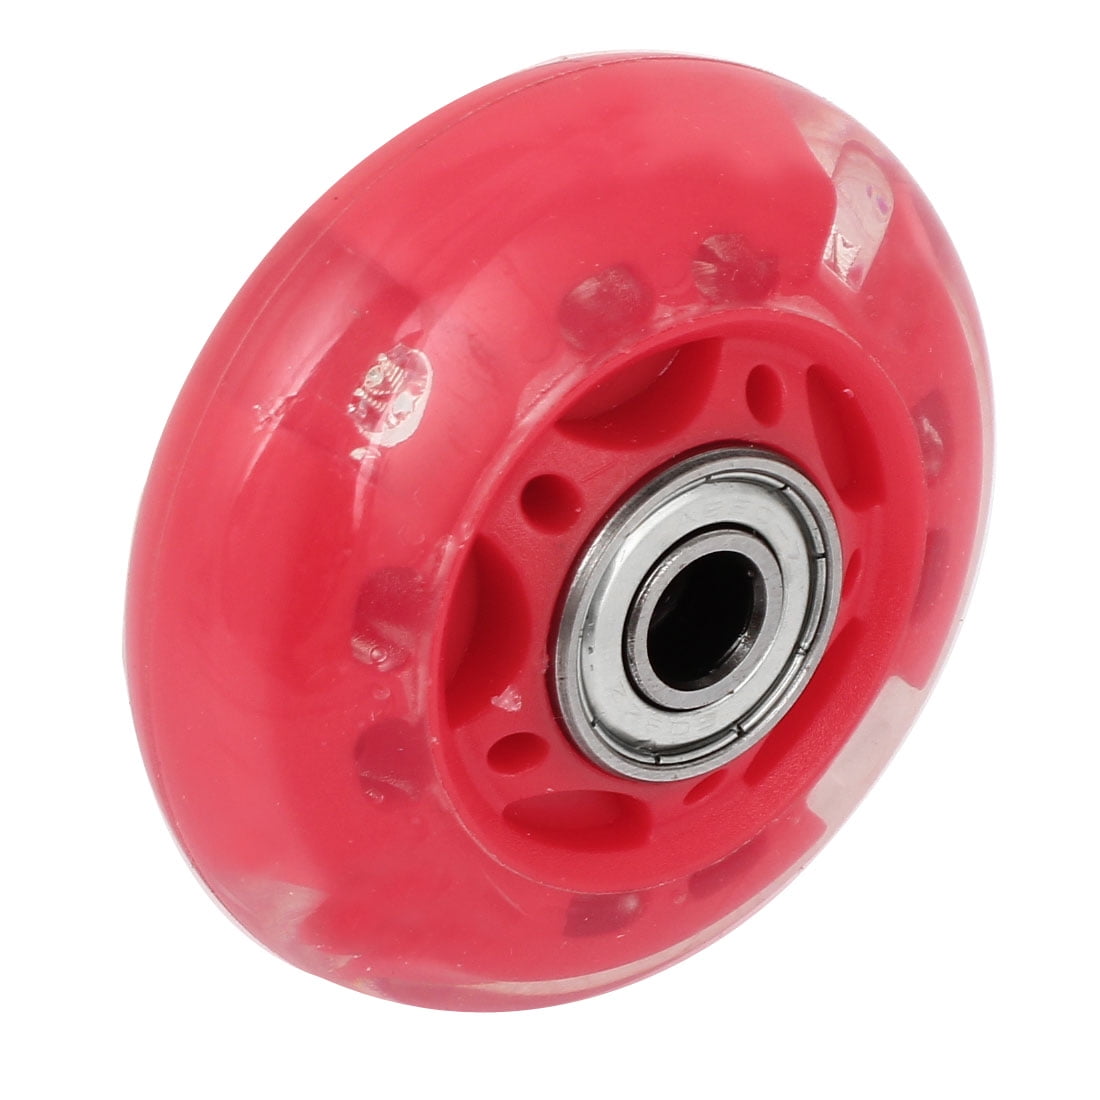 Unique Bargains Shining Colorful Bearing Inline Skate Wheel Clear Red for Skating Shoes